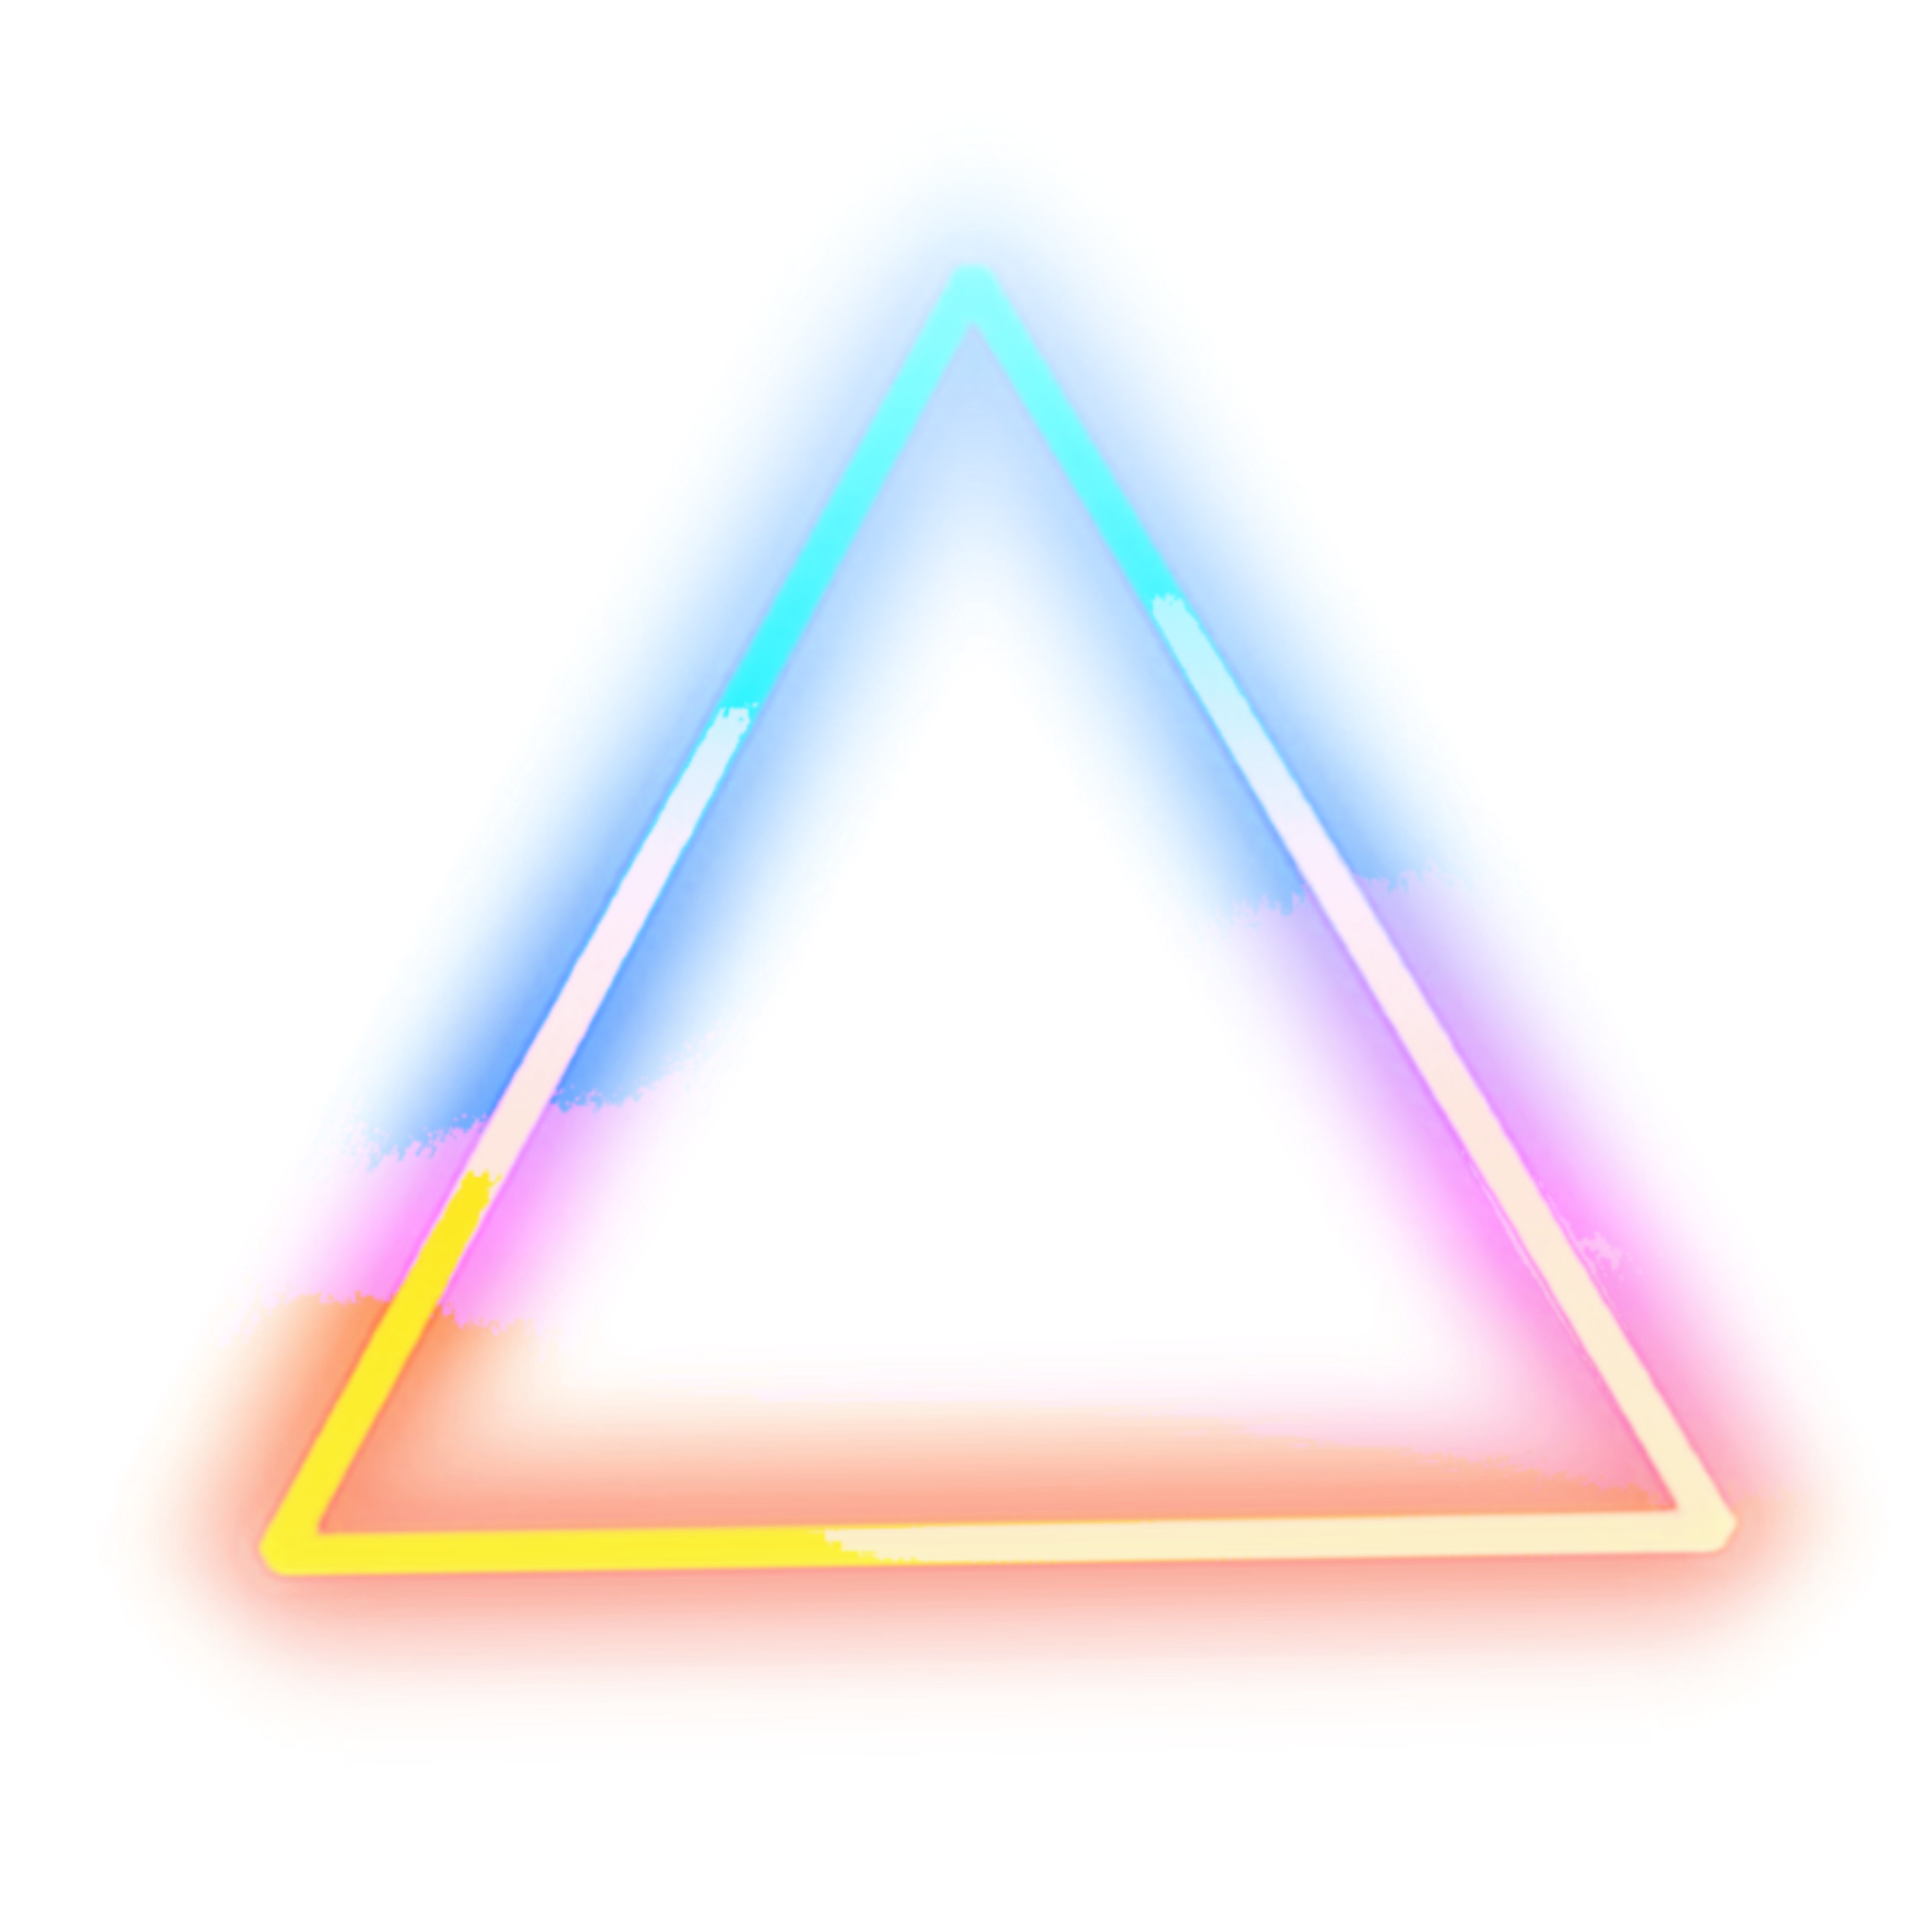 Abstract Triangle Free Transparent Image HQ PNG Image